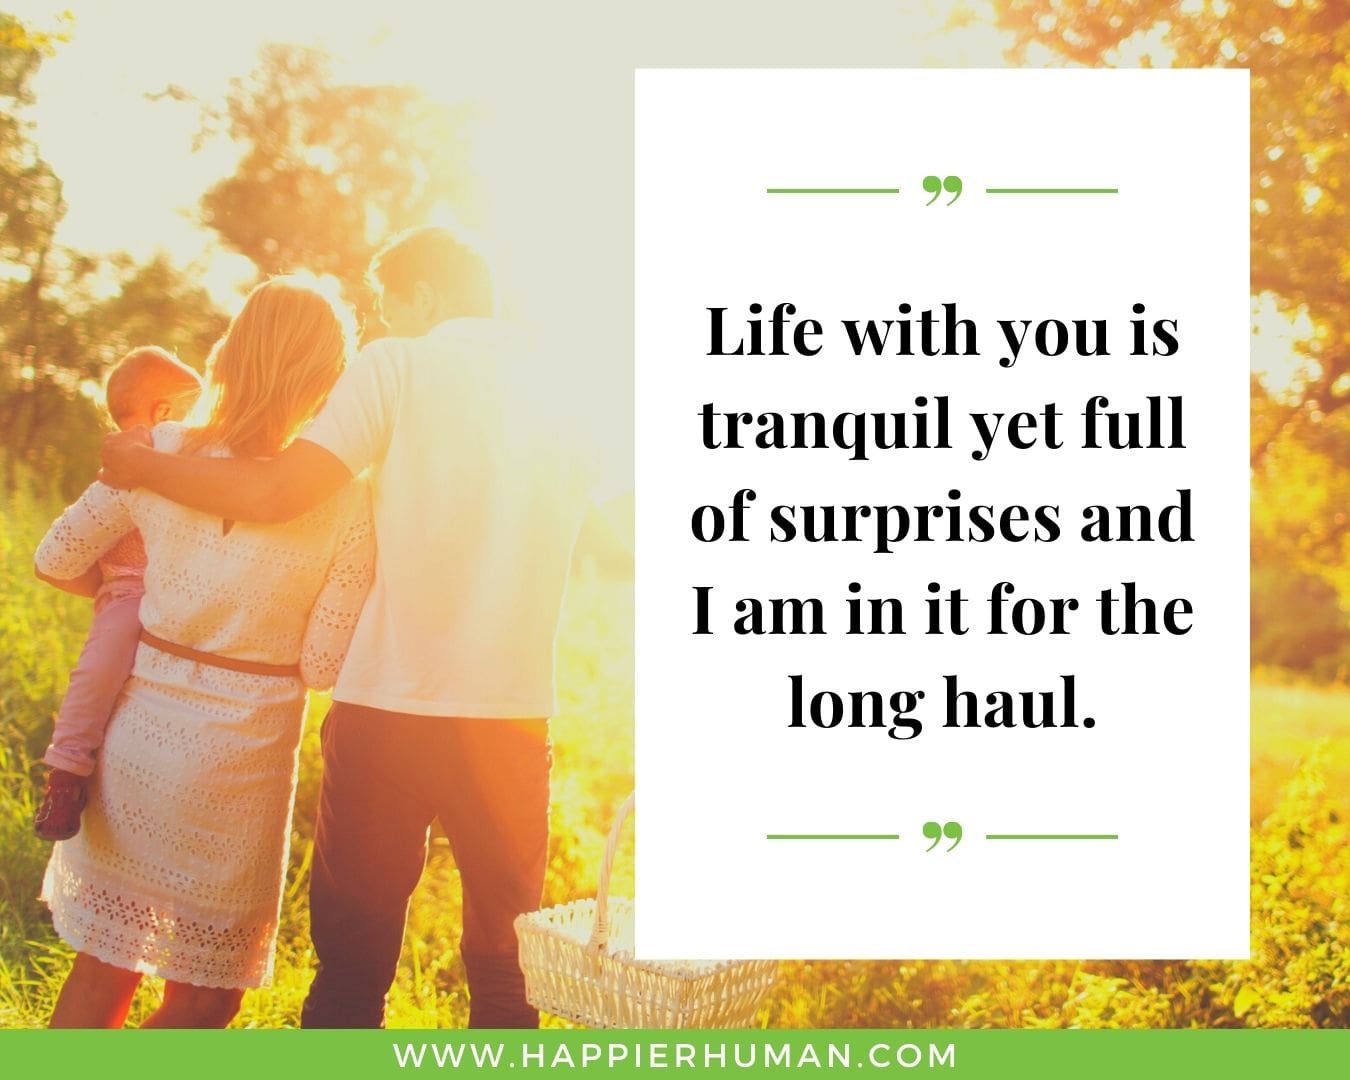 Sweet and Romantic Love Quotes for Her - “Life with you is tranquil yet full of surprises and I am in it for the long haul.”